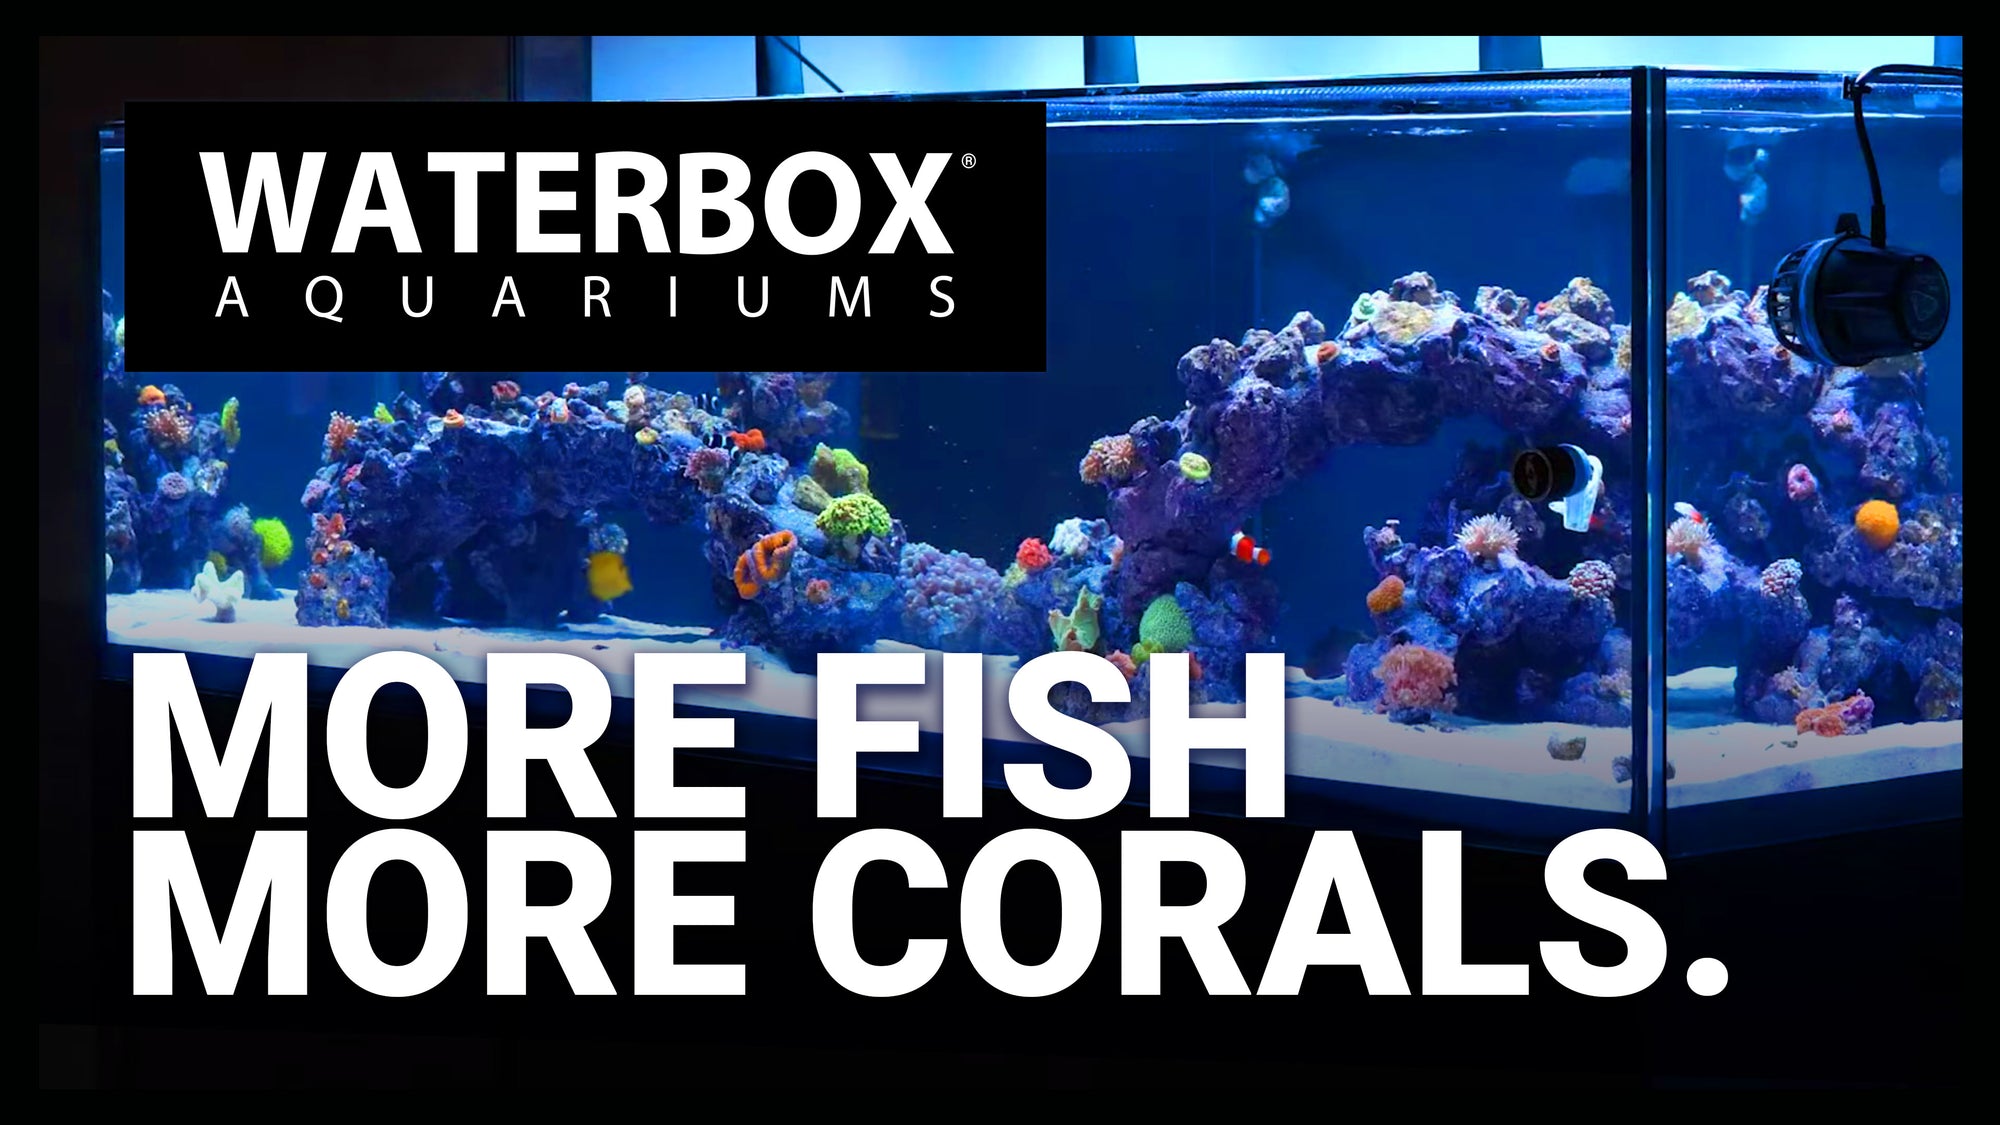 Final Shipment of SPS Corals + Fish Arrive for the REEF LX.